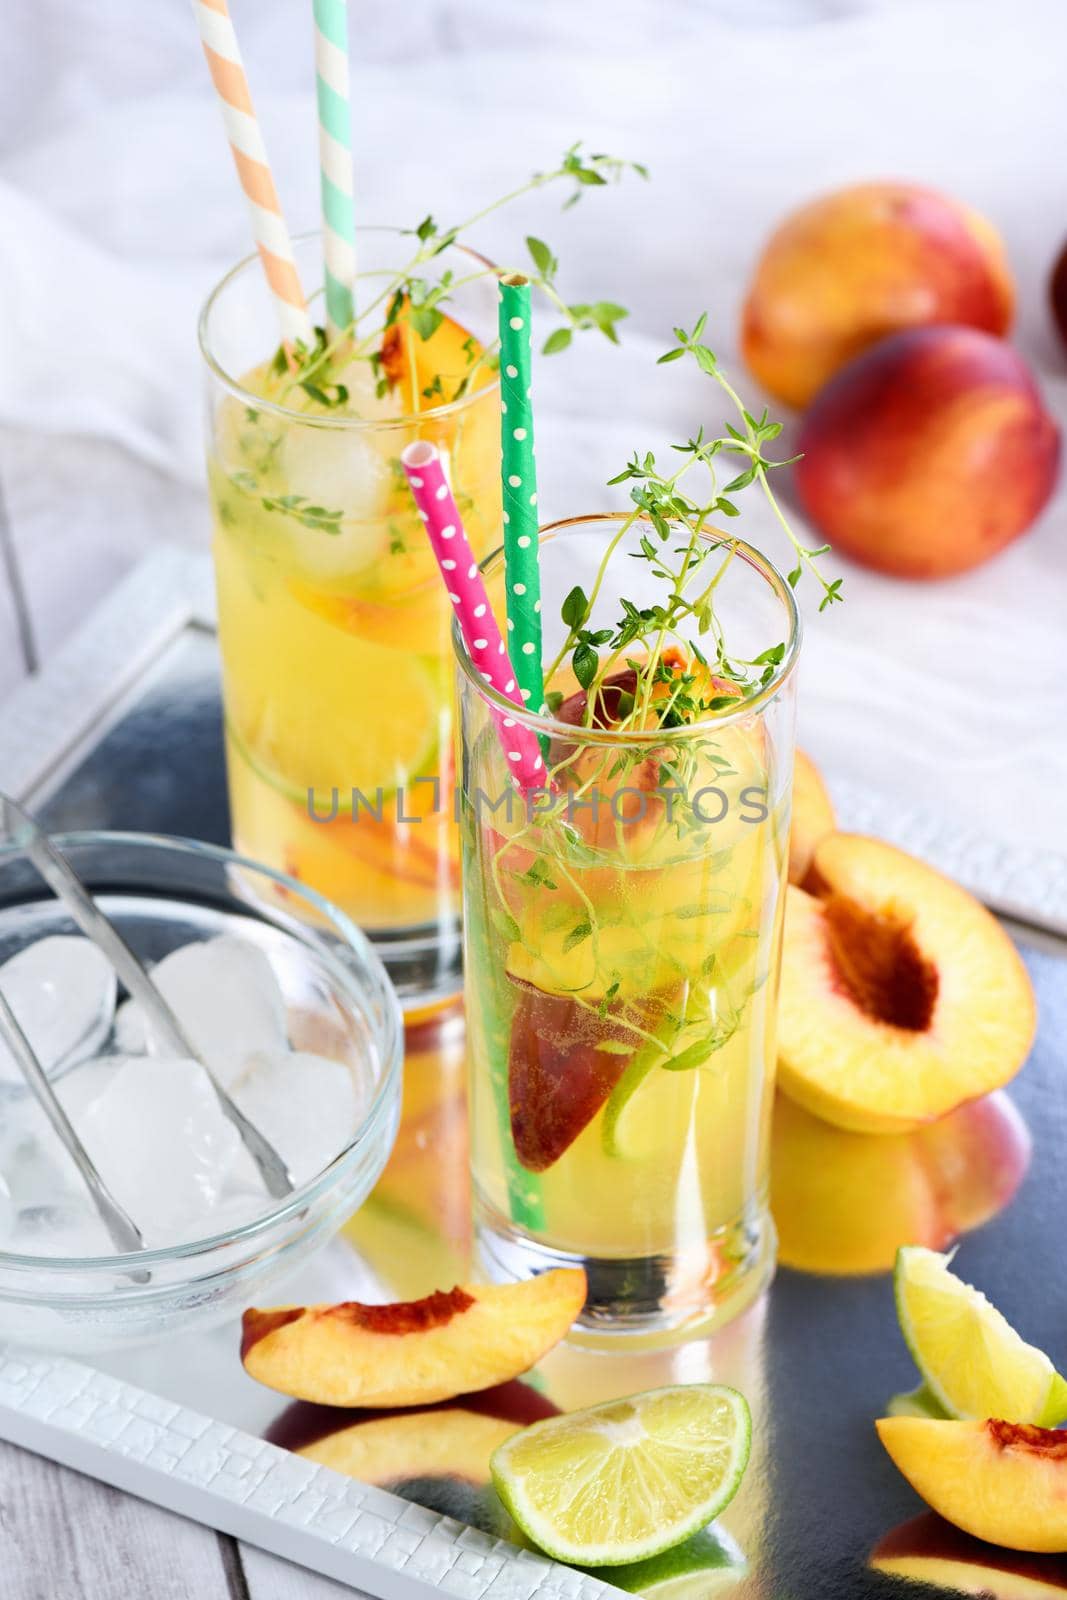 Peach summer cocktail. Refreshing organic non-alcoholic drink, lemonade with ripe nectarine, thyme and lime  